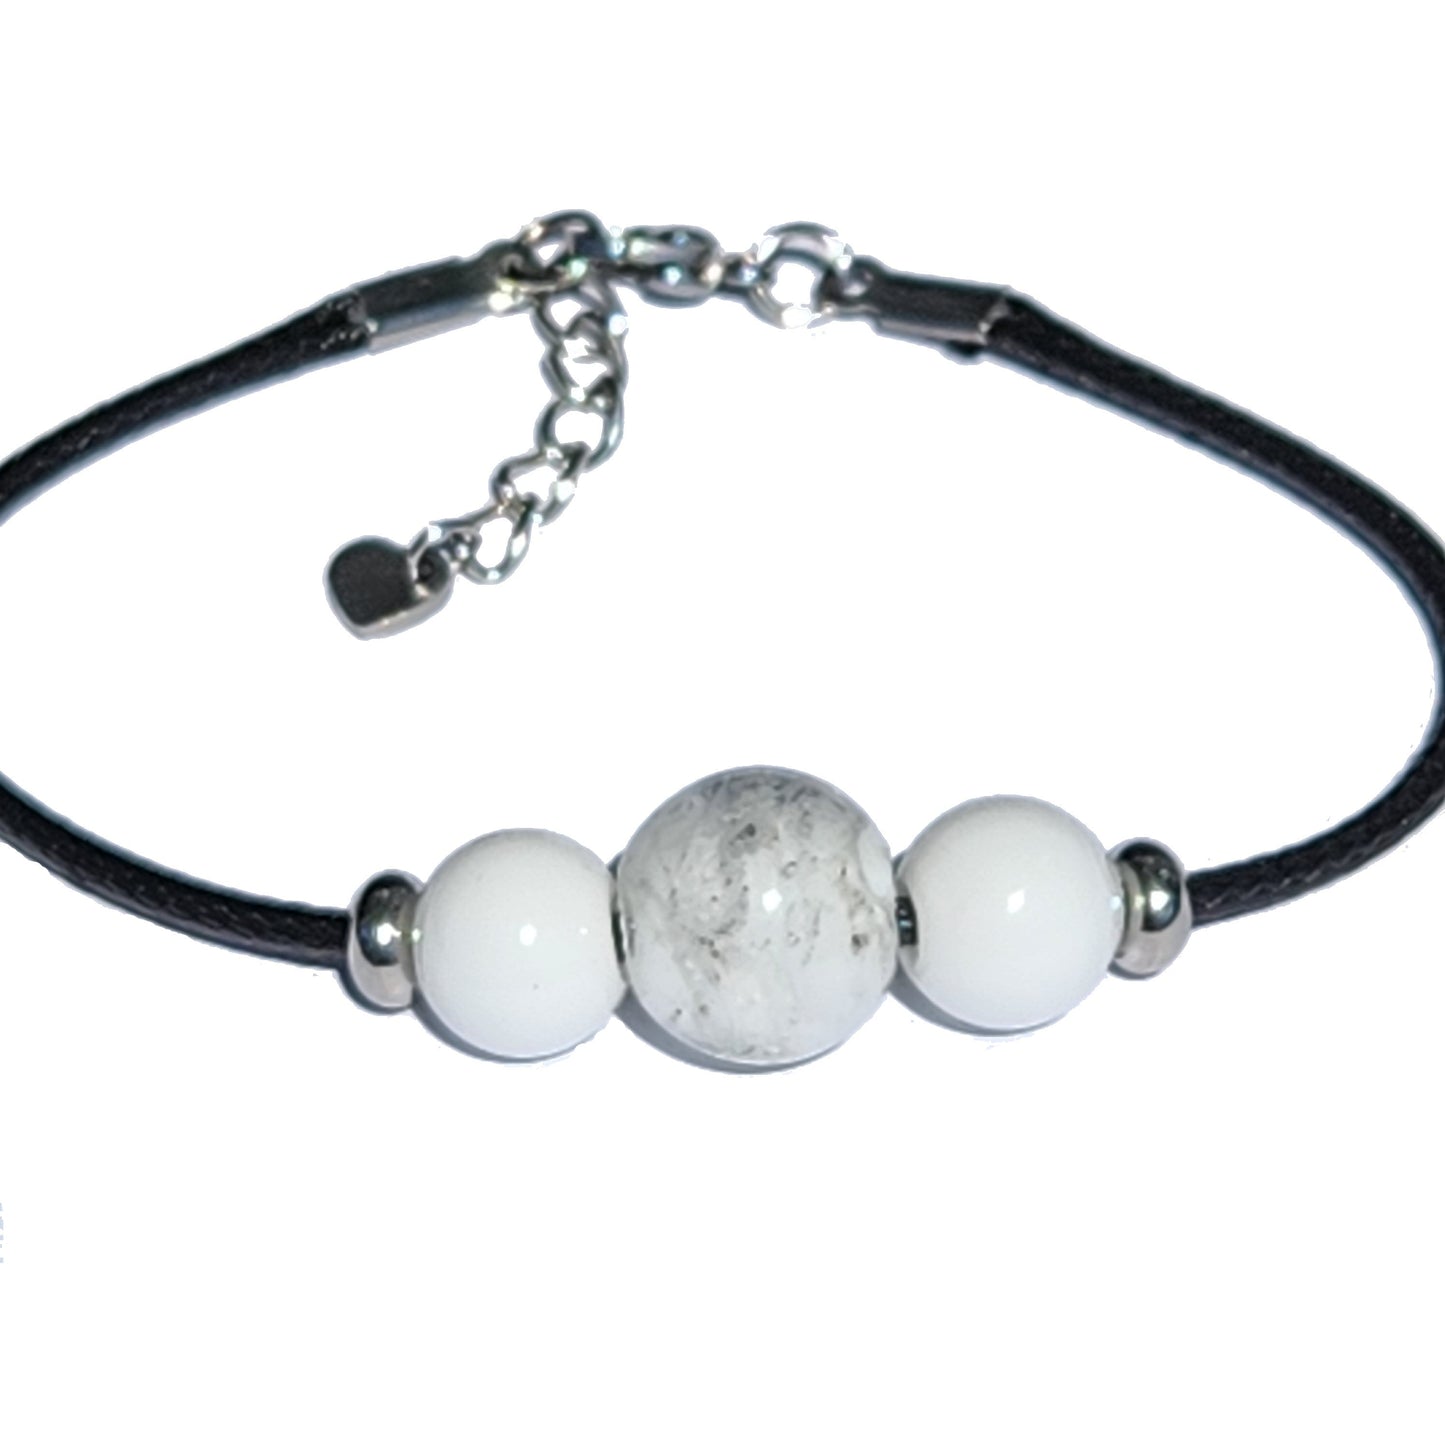 Cremation Jewelry Bracelet - Forever Close